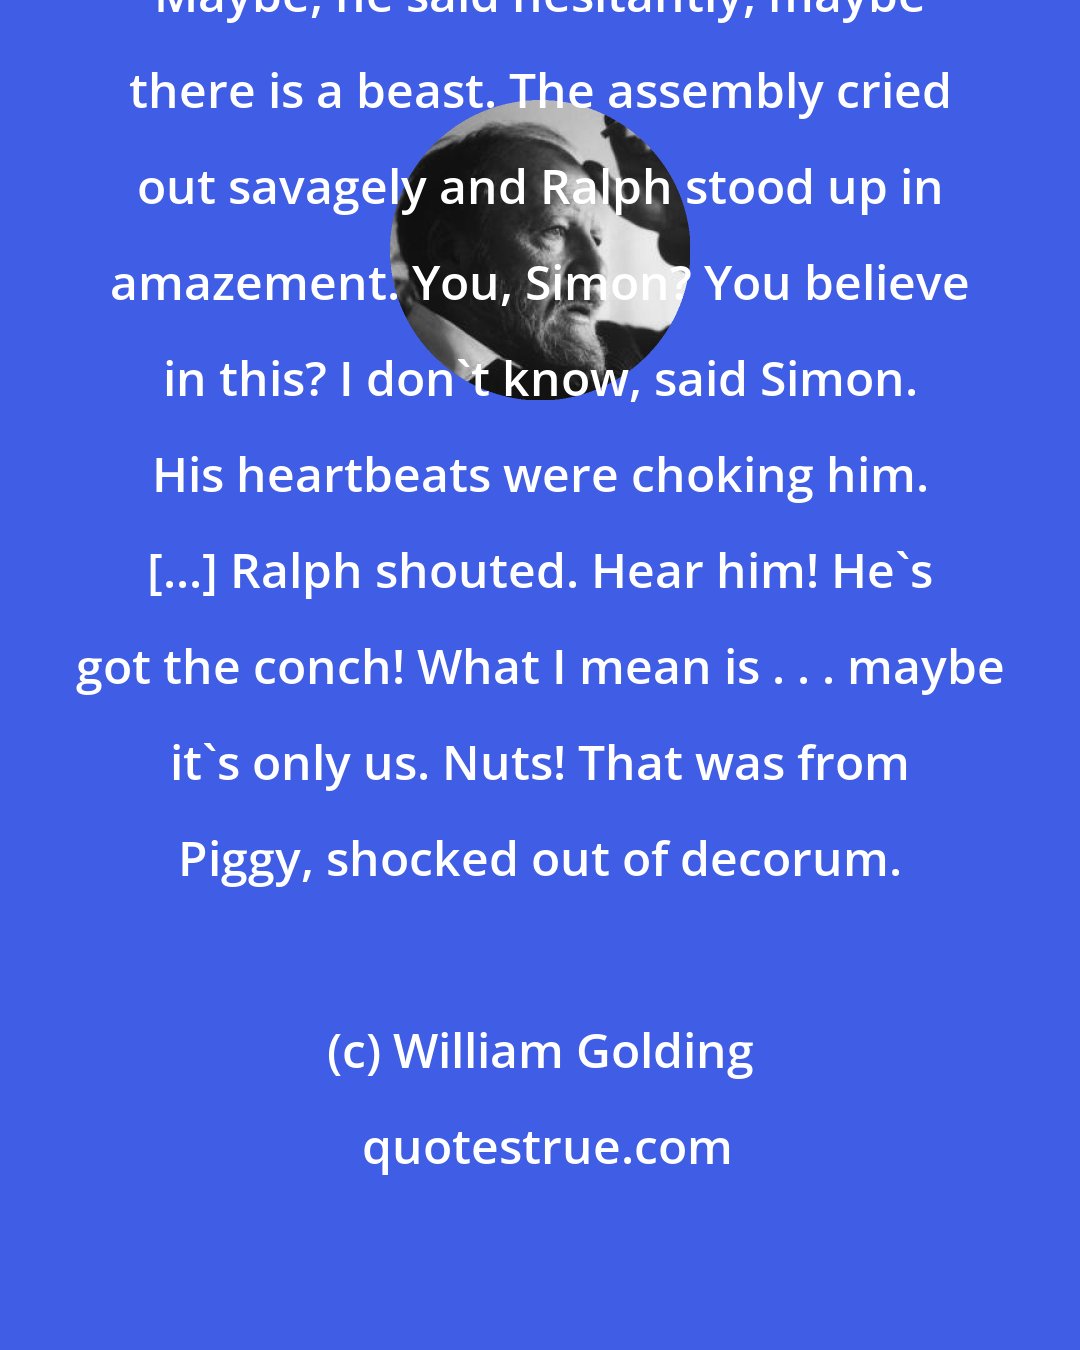 William Golding: Maybe, he said hesitantly, maybe there is a beast. The assembly cried out savagely and Ralph stood up in amazement. You, Simon? You believe in this? I don't know, said Simon. His heartbeats were choking him. [...] Ralph shouted. Hear him! He's got the conch! What I mean is . . . maybe it's only us. Nuts! That was from Piggy, shocked out of decorum.